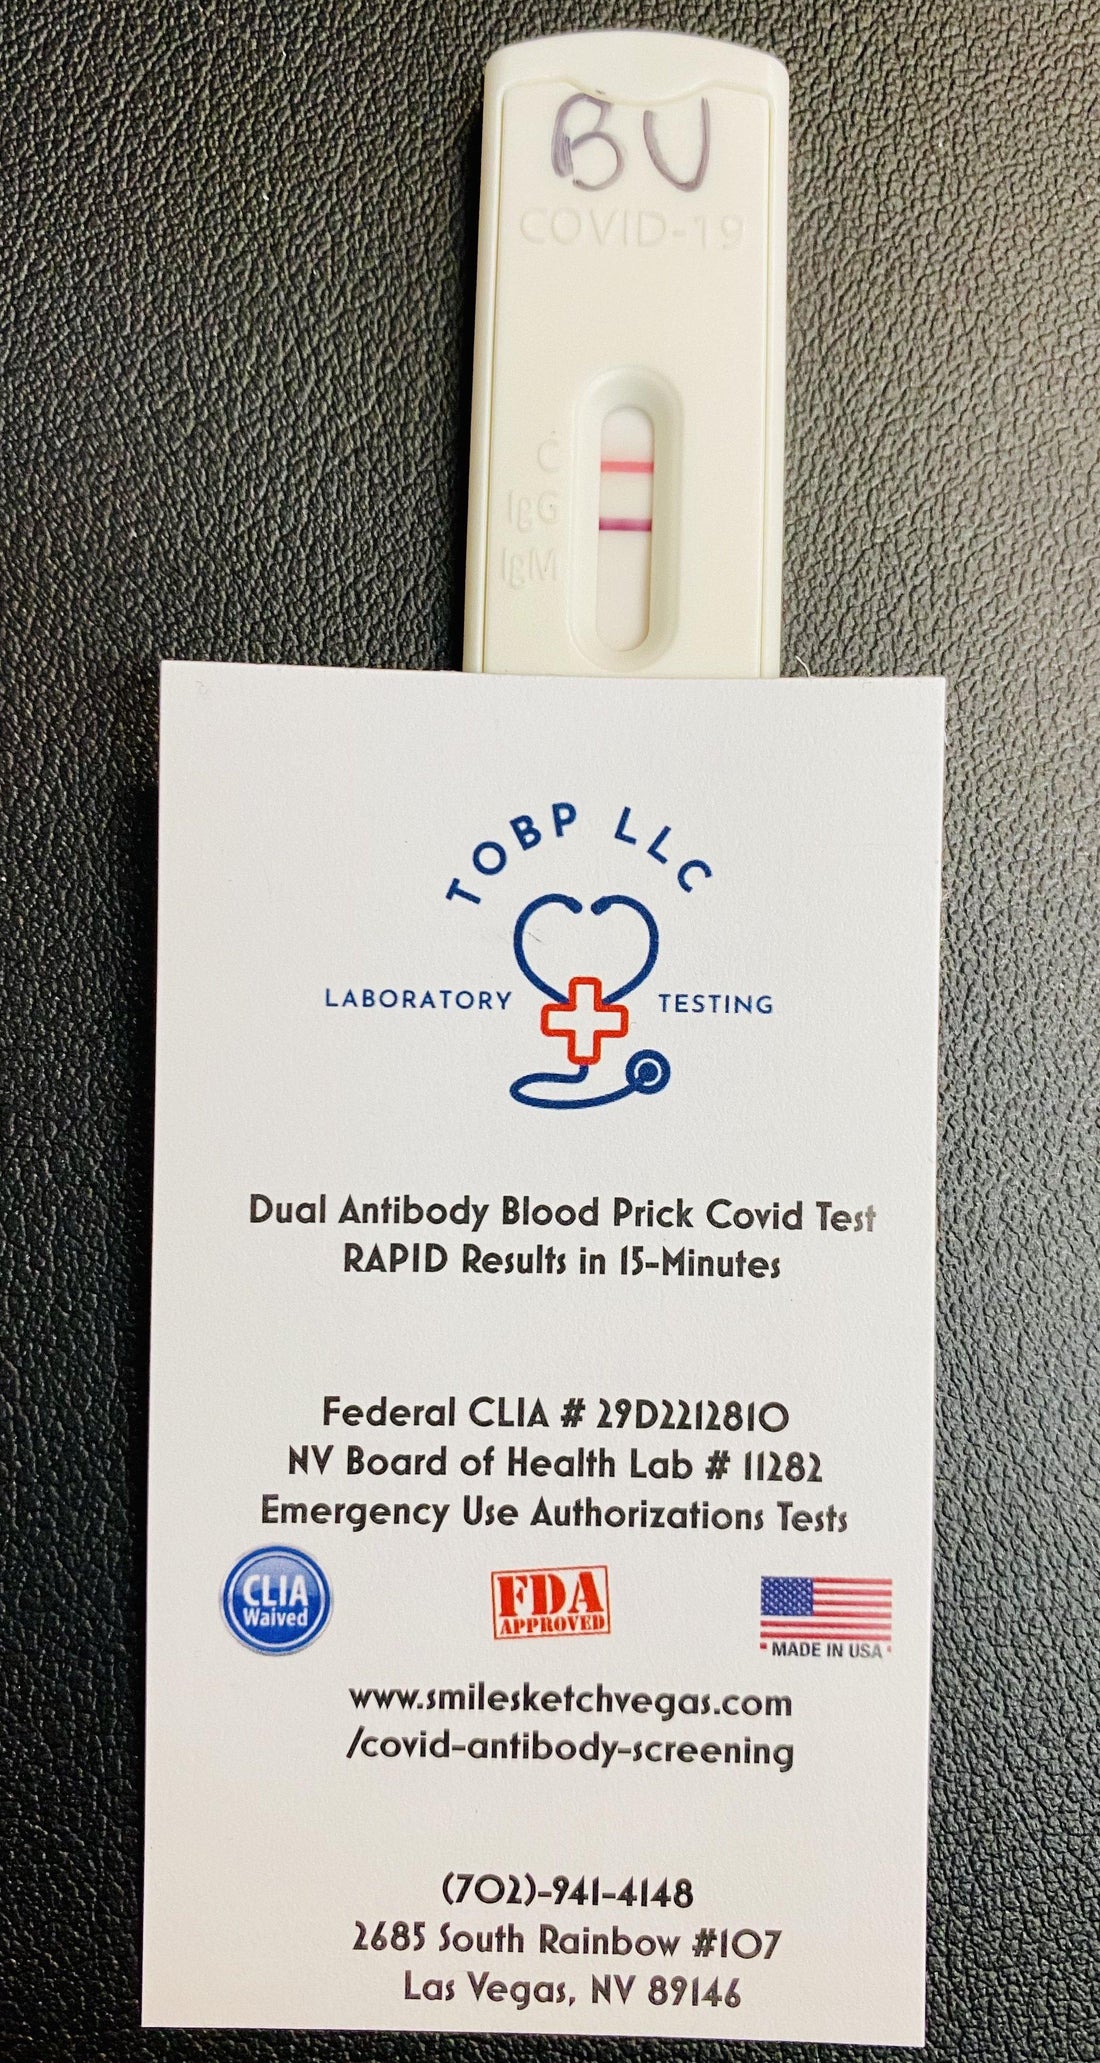 What is the Rapid Dual Antibody Covid Blood Test? - thecleanhand...the perfect no touch door opener!